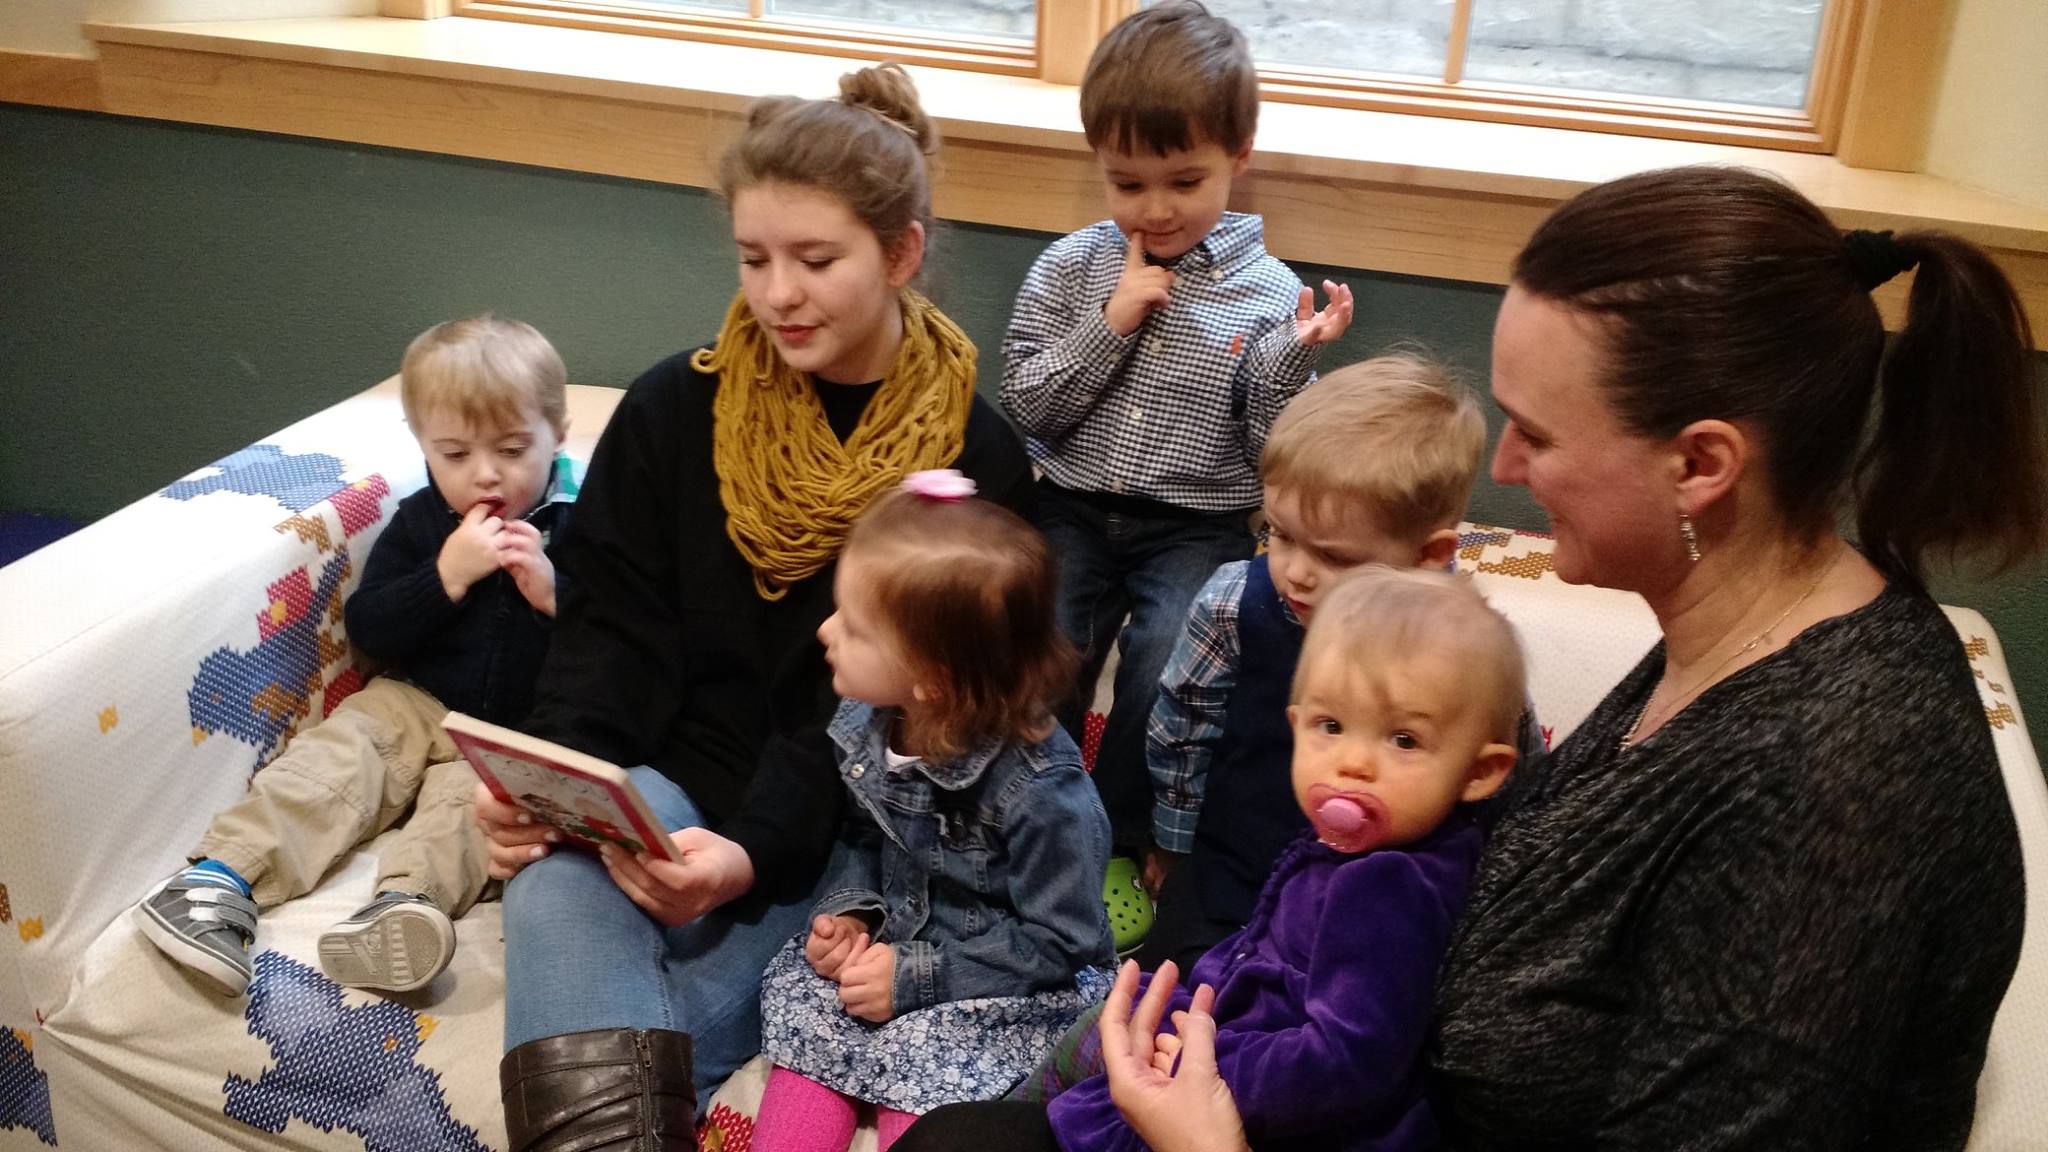 A woman reading a story out loud while sitting on a couch surrounded by kids